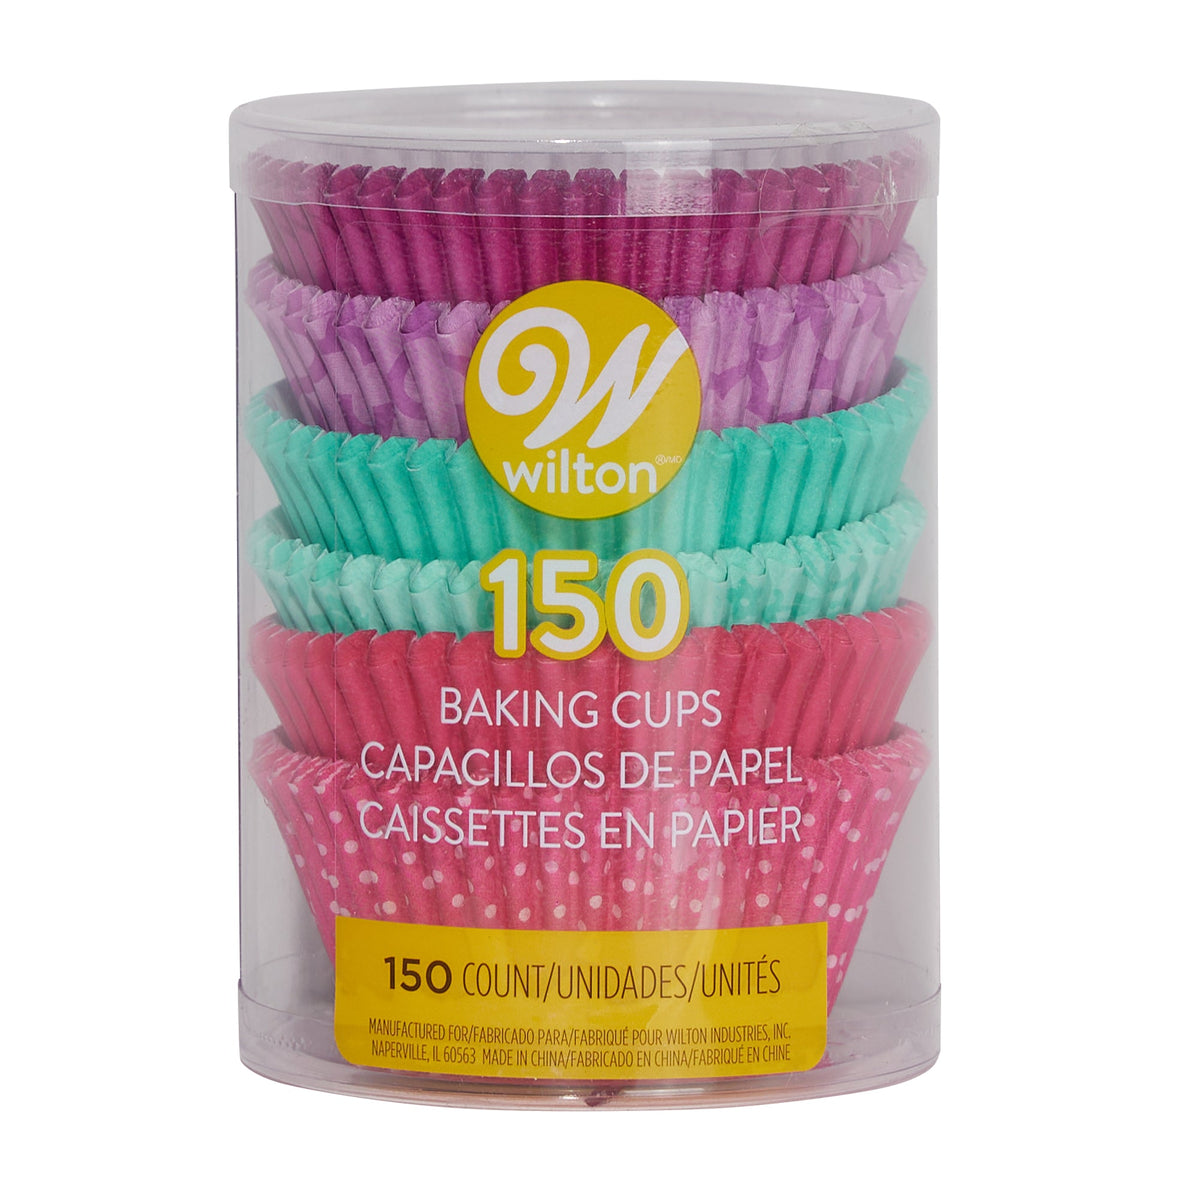 WILTON INDUSTRIES Cake Supplies Cupcakes Baking Cups, Pink & Turquoise, 150 Count 070896321824